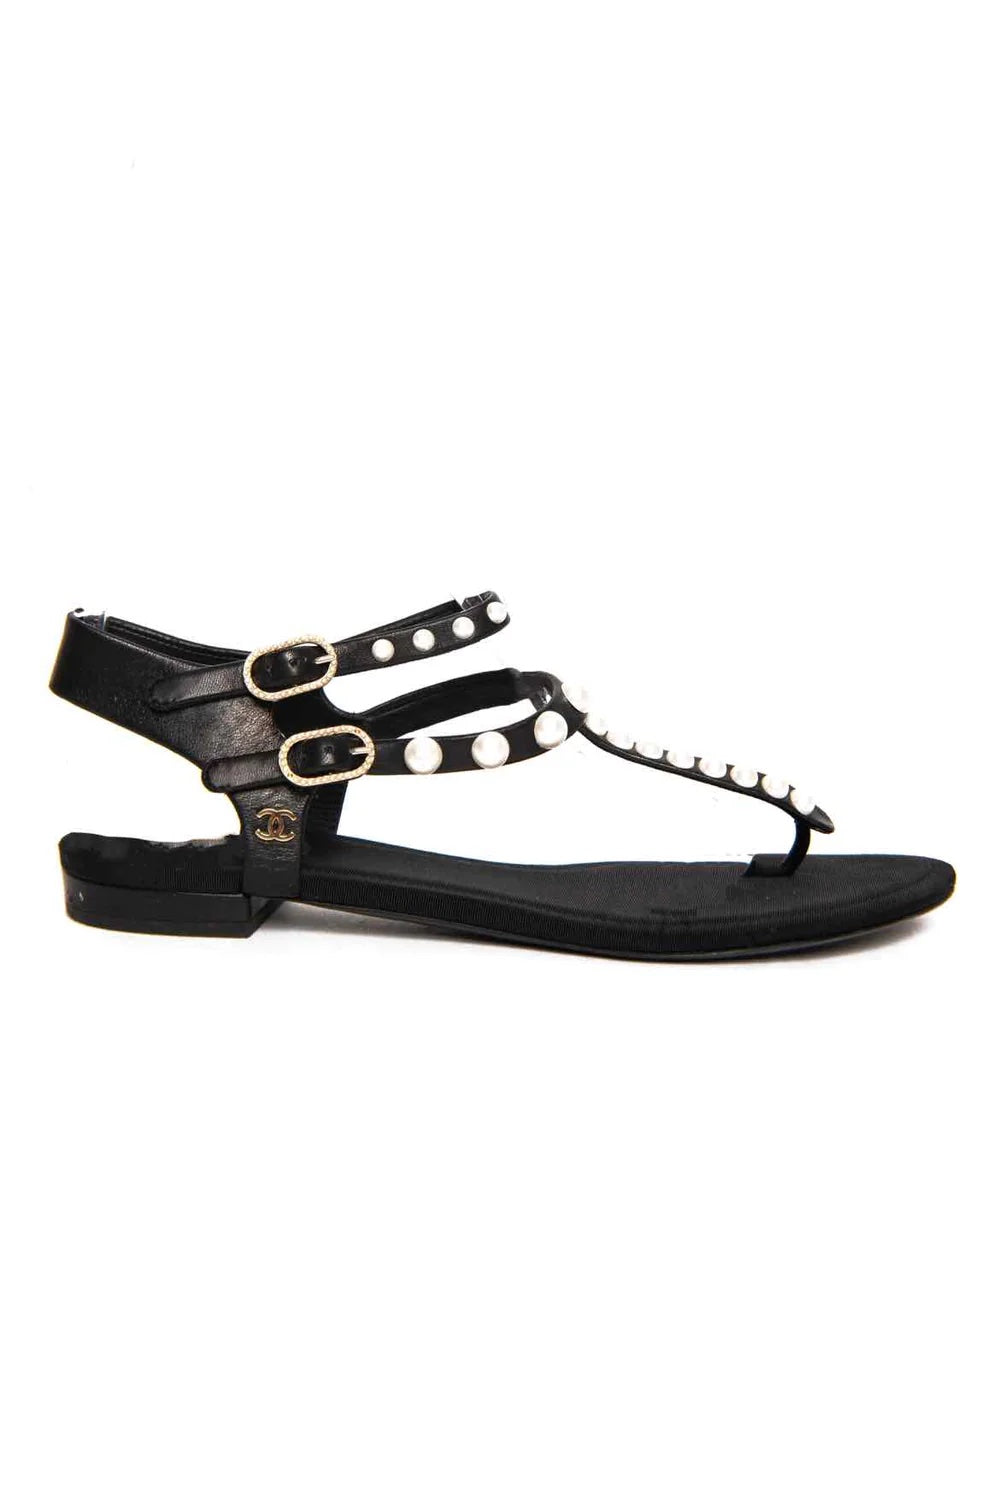 CHANEL PEARL EMBELLISHED THONG FLAT SANDALS – Caroline's Fashion Luxuries